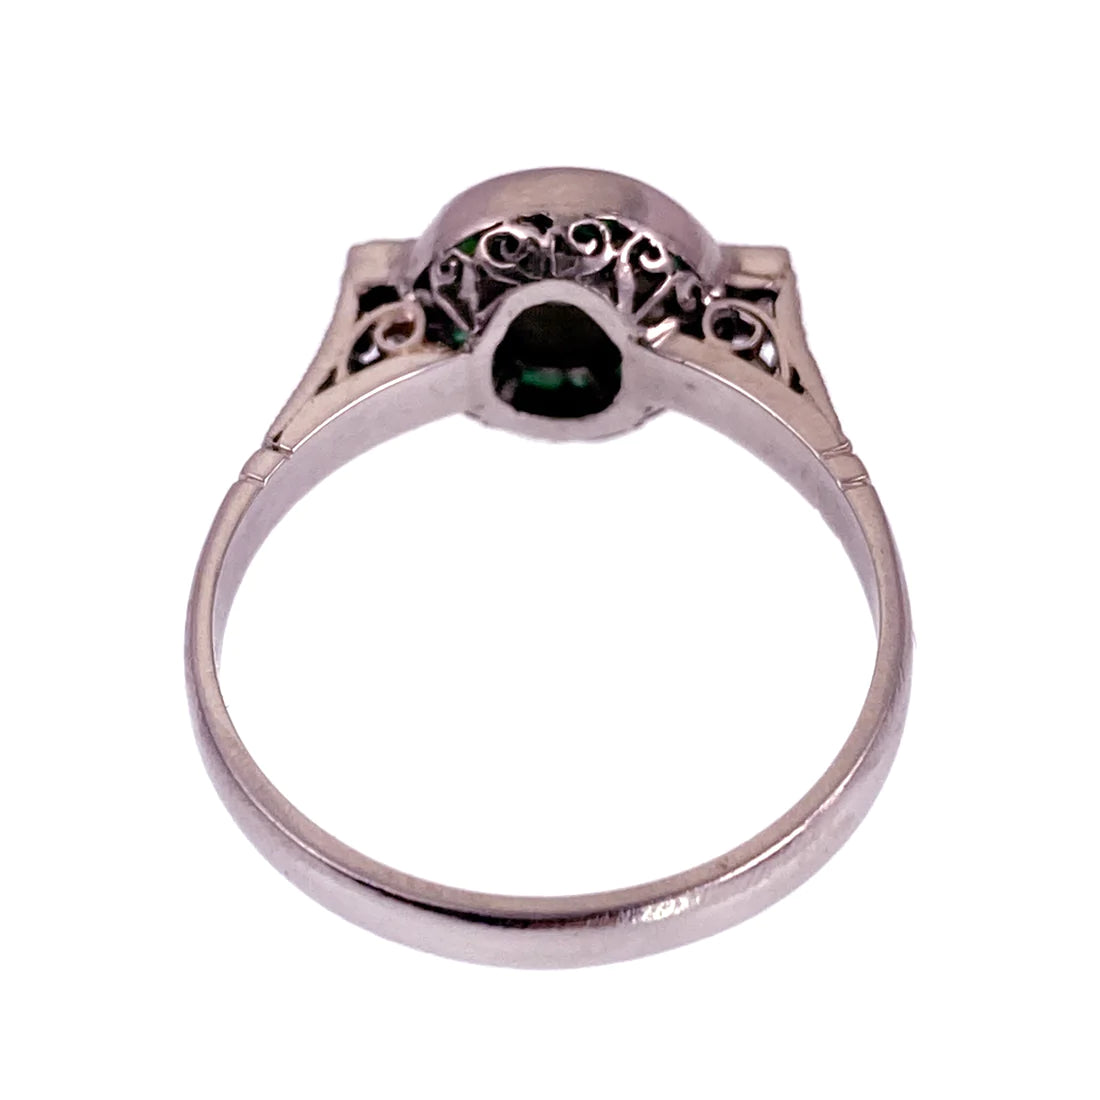 Incredible Art Deco All Original Platinum Target Ring with Emeralds and Diamonds